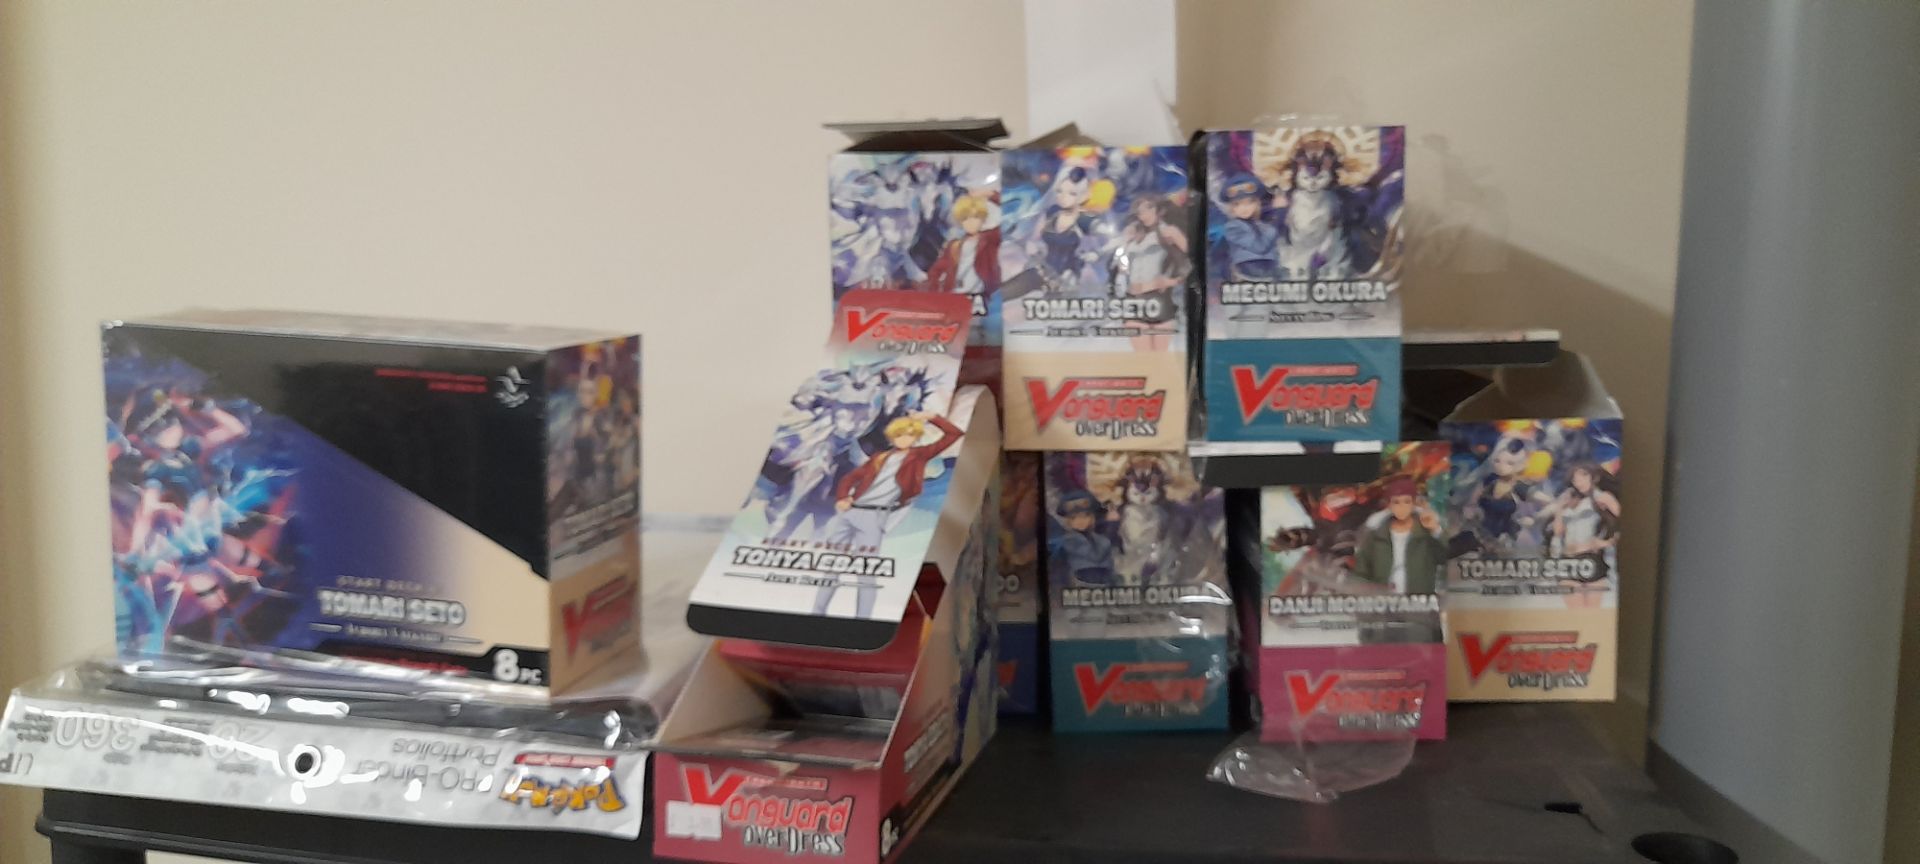 Contents of Five tier plastic shelving unit and metal display stand to include Vanguard CardFight, - Image 2 of 6